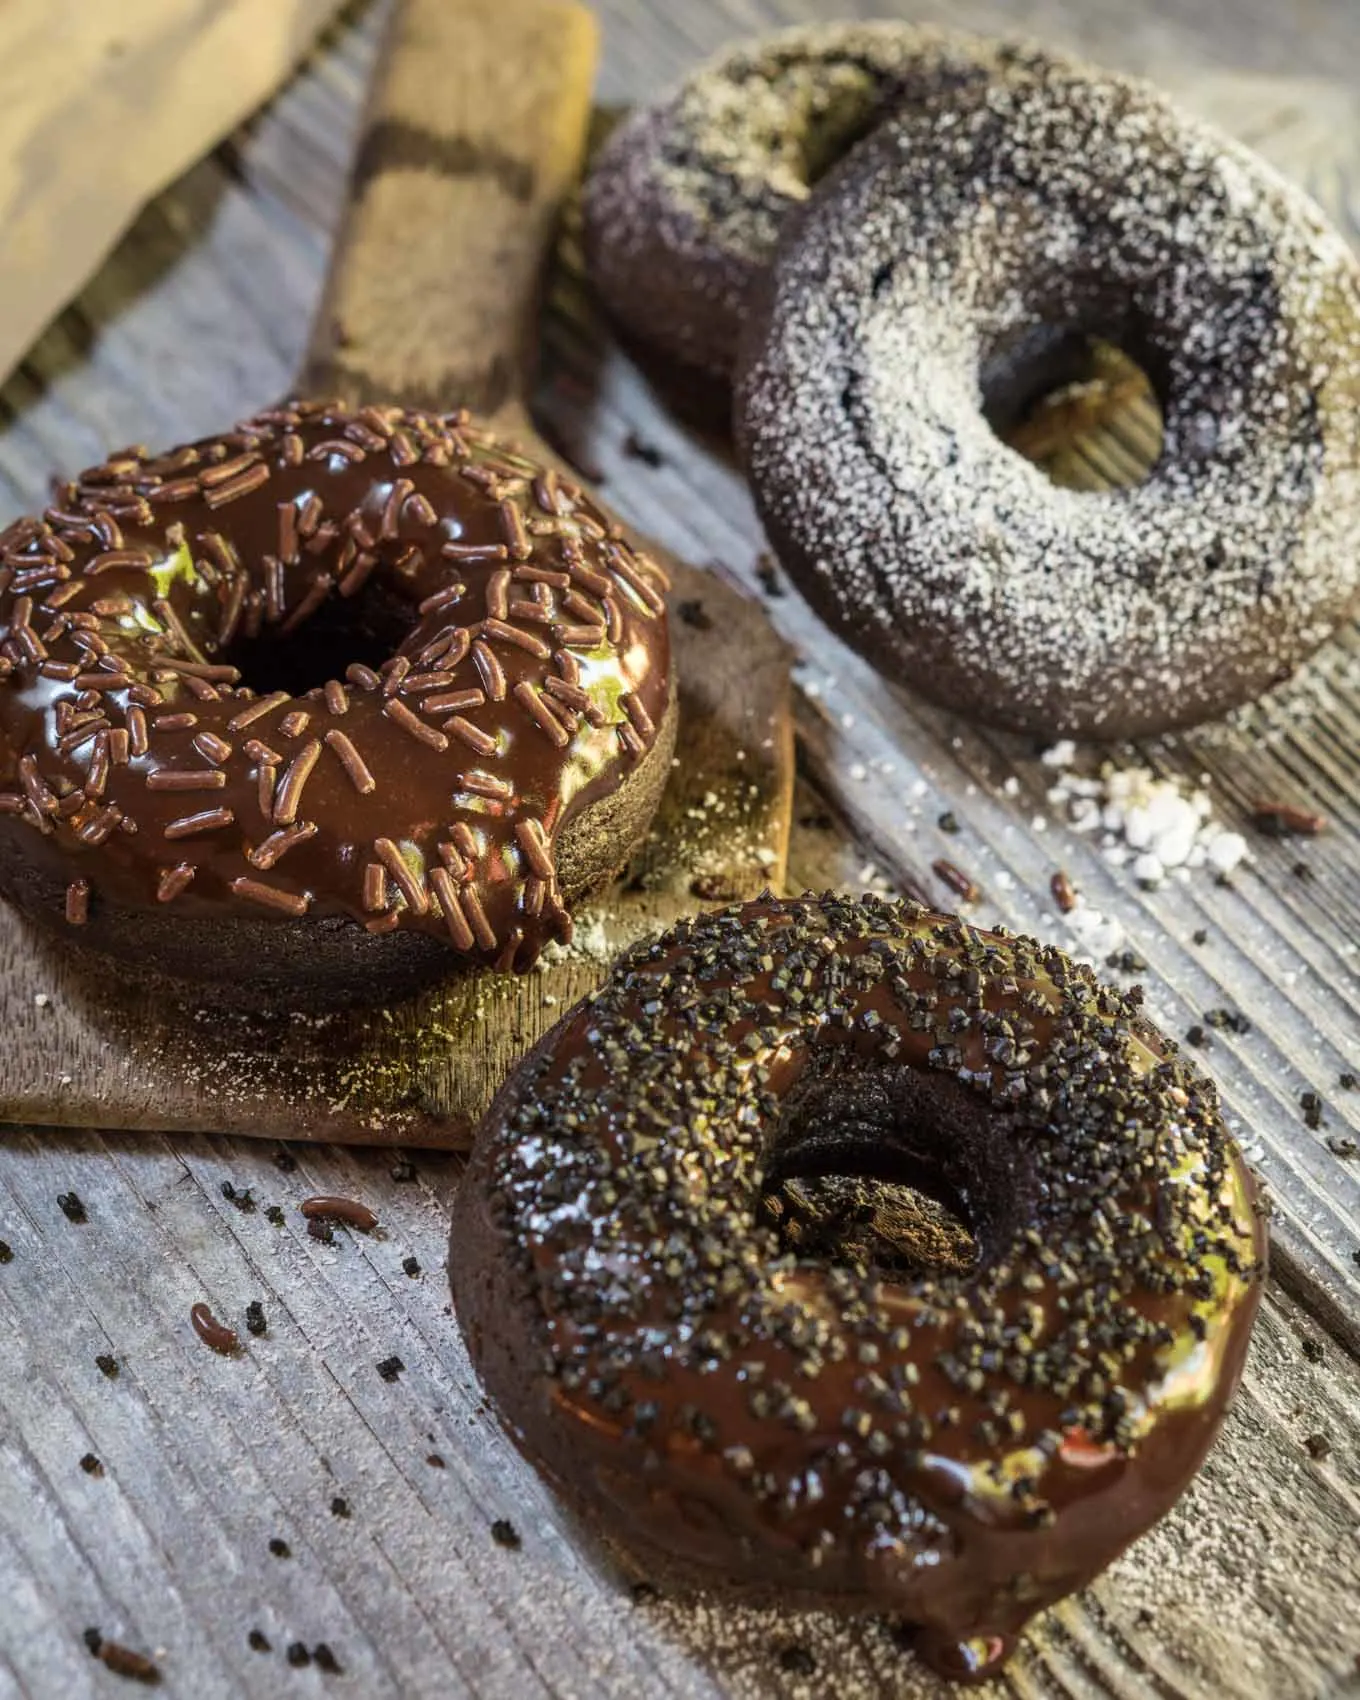 Three chocolate baked donuts. One dusted with powdered sugar, and two glazed with chocolate and sprinkled with chocolate sprinkles.